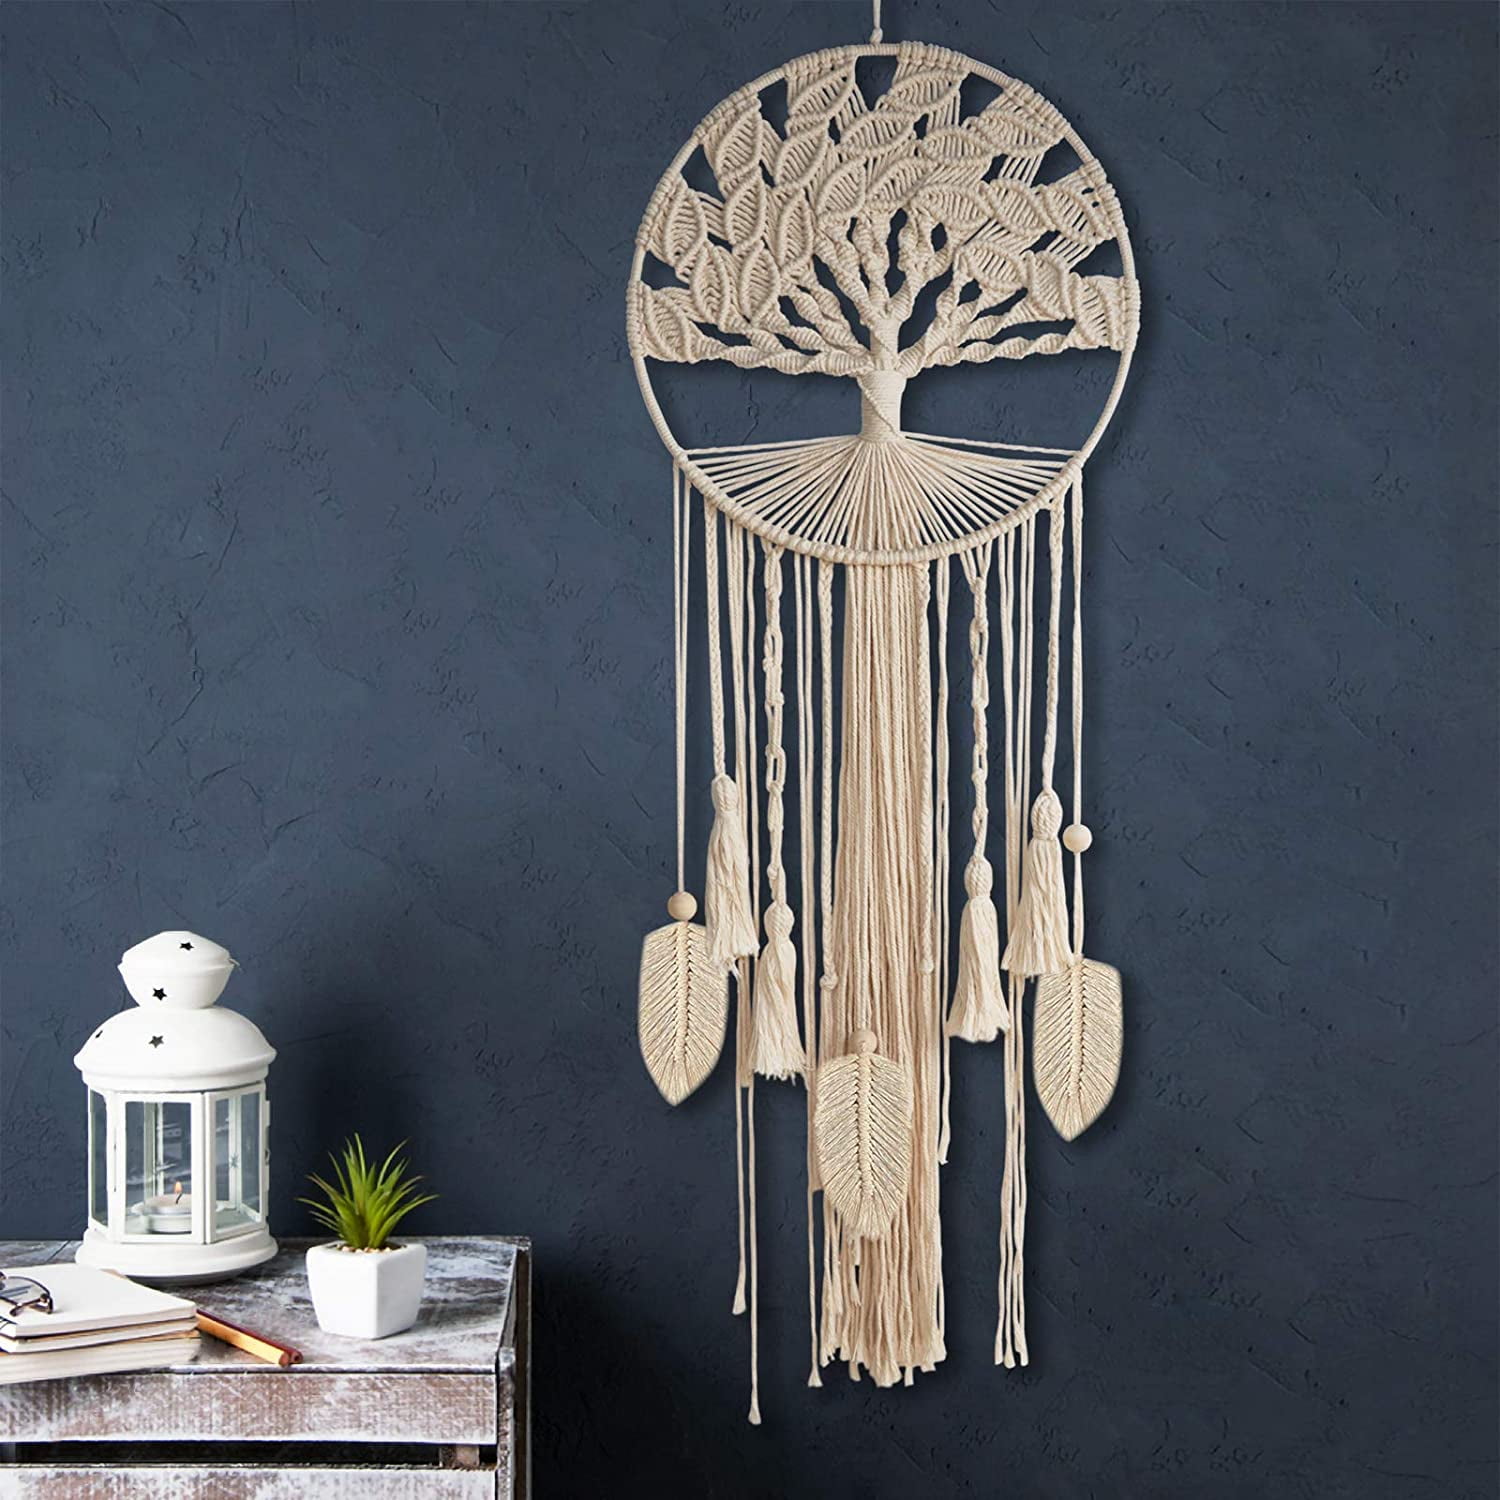 Baby Room Wall Decor, Large Dream catcher wall hanging Dreamcatchers wall hanging Sale handmade Gray Dreamcatcher set Boho dreamcatcher